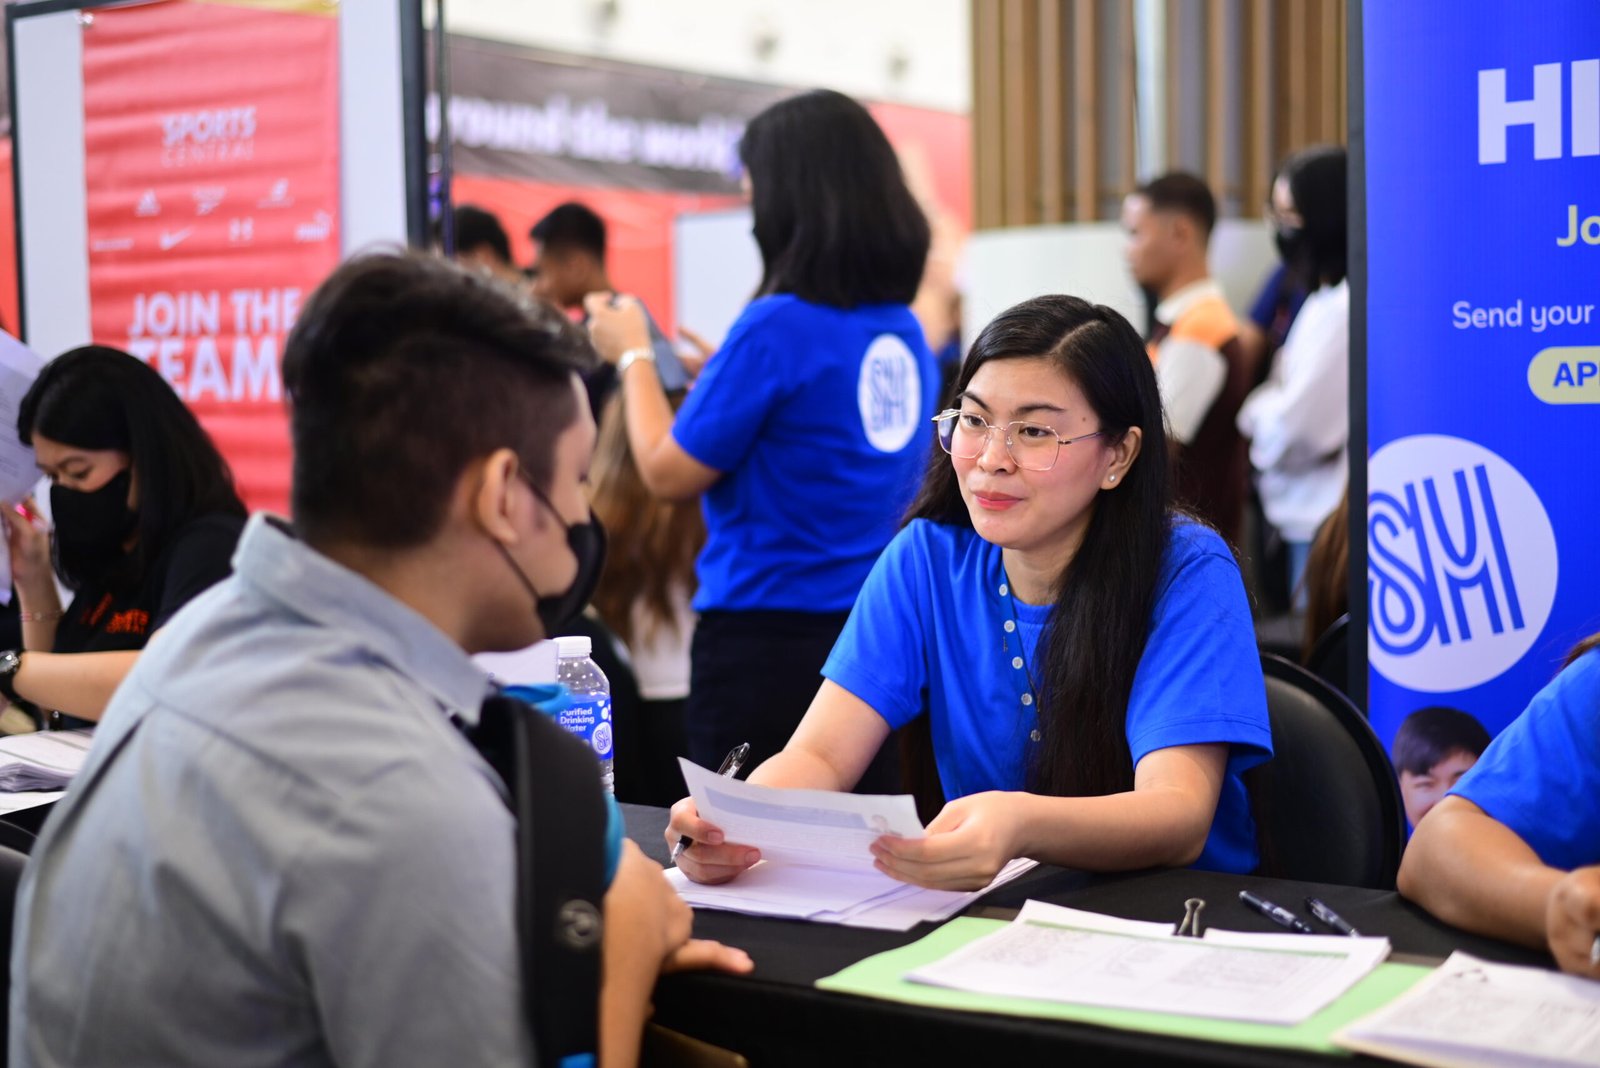 SM City Grand Central bolster workforce with Job Fair